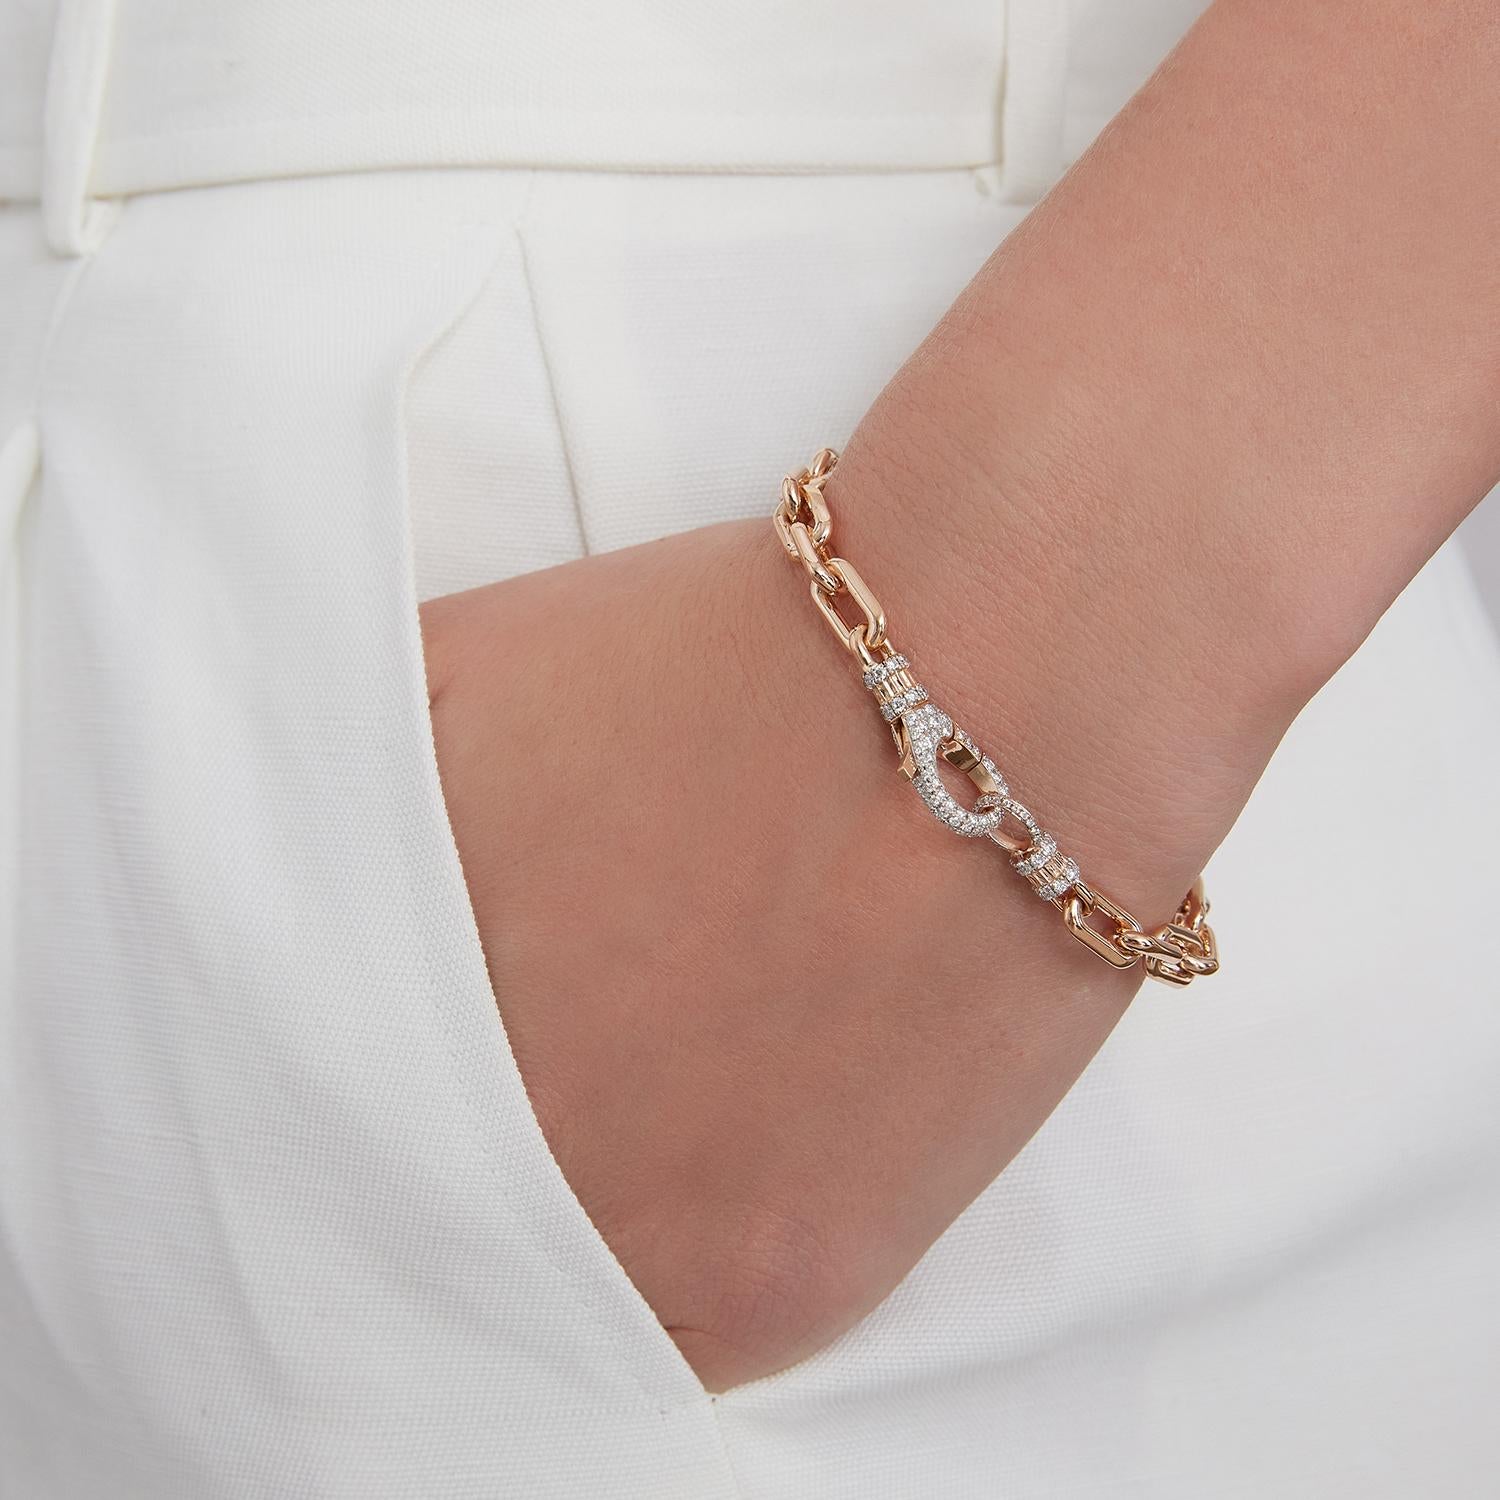 Walters Faith's Clive Collection 18K Rose Gold Chain Link Bracelet with All Diamond Lobster Clasp. 1.2 Diamond Carat Weight. Bracelet has 10 double links, fitting a 6.5